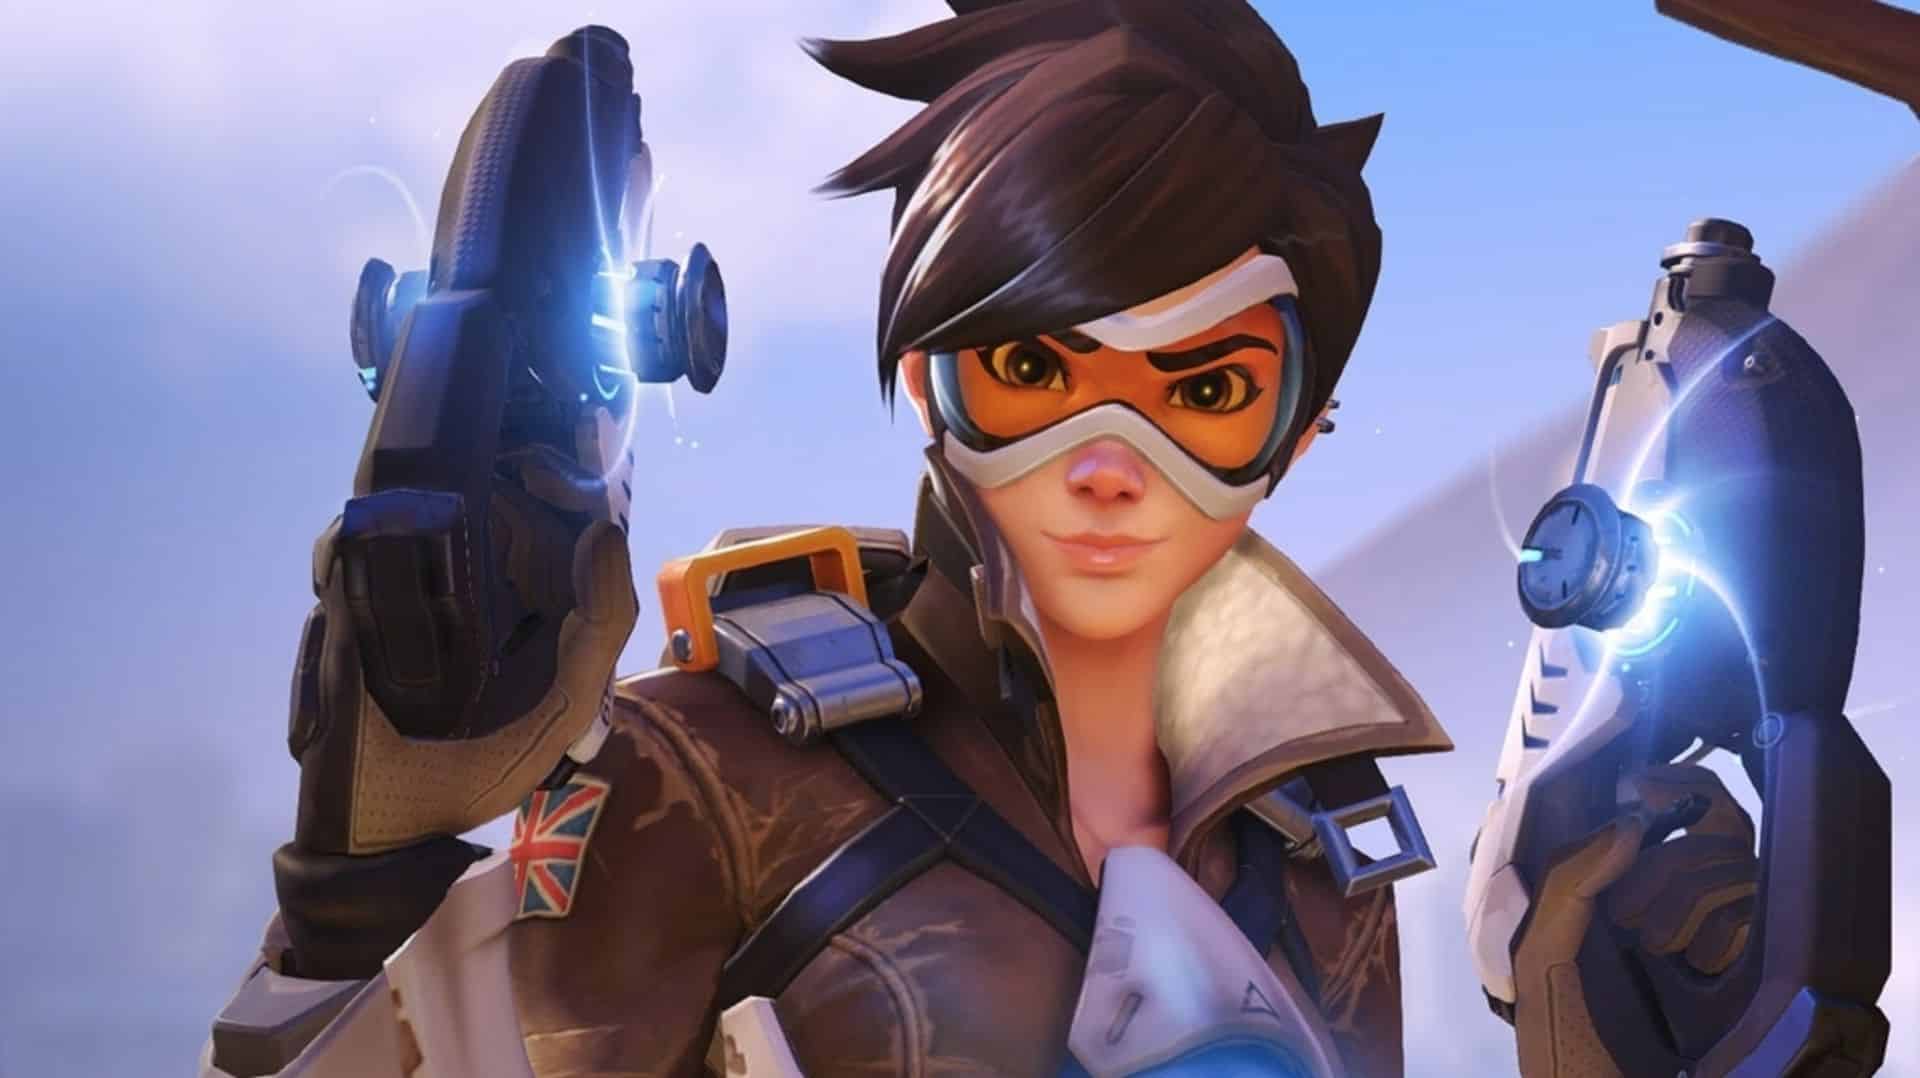 Overwatch Tracer with guns